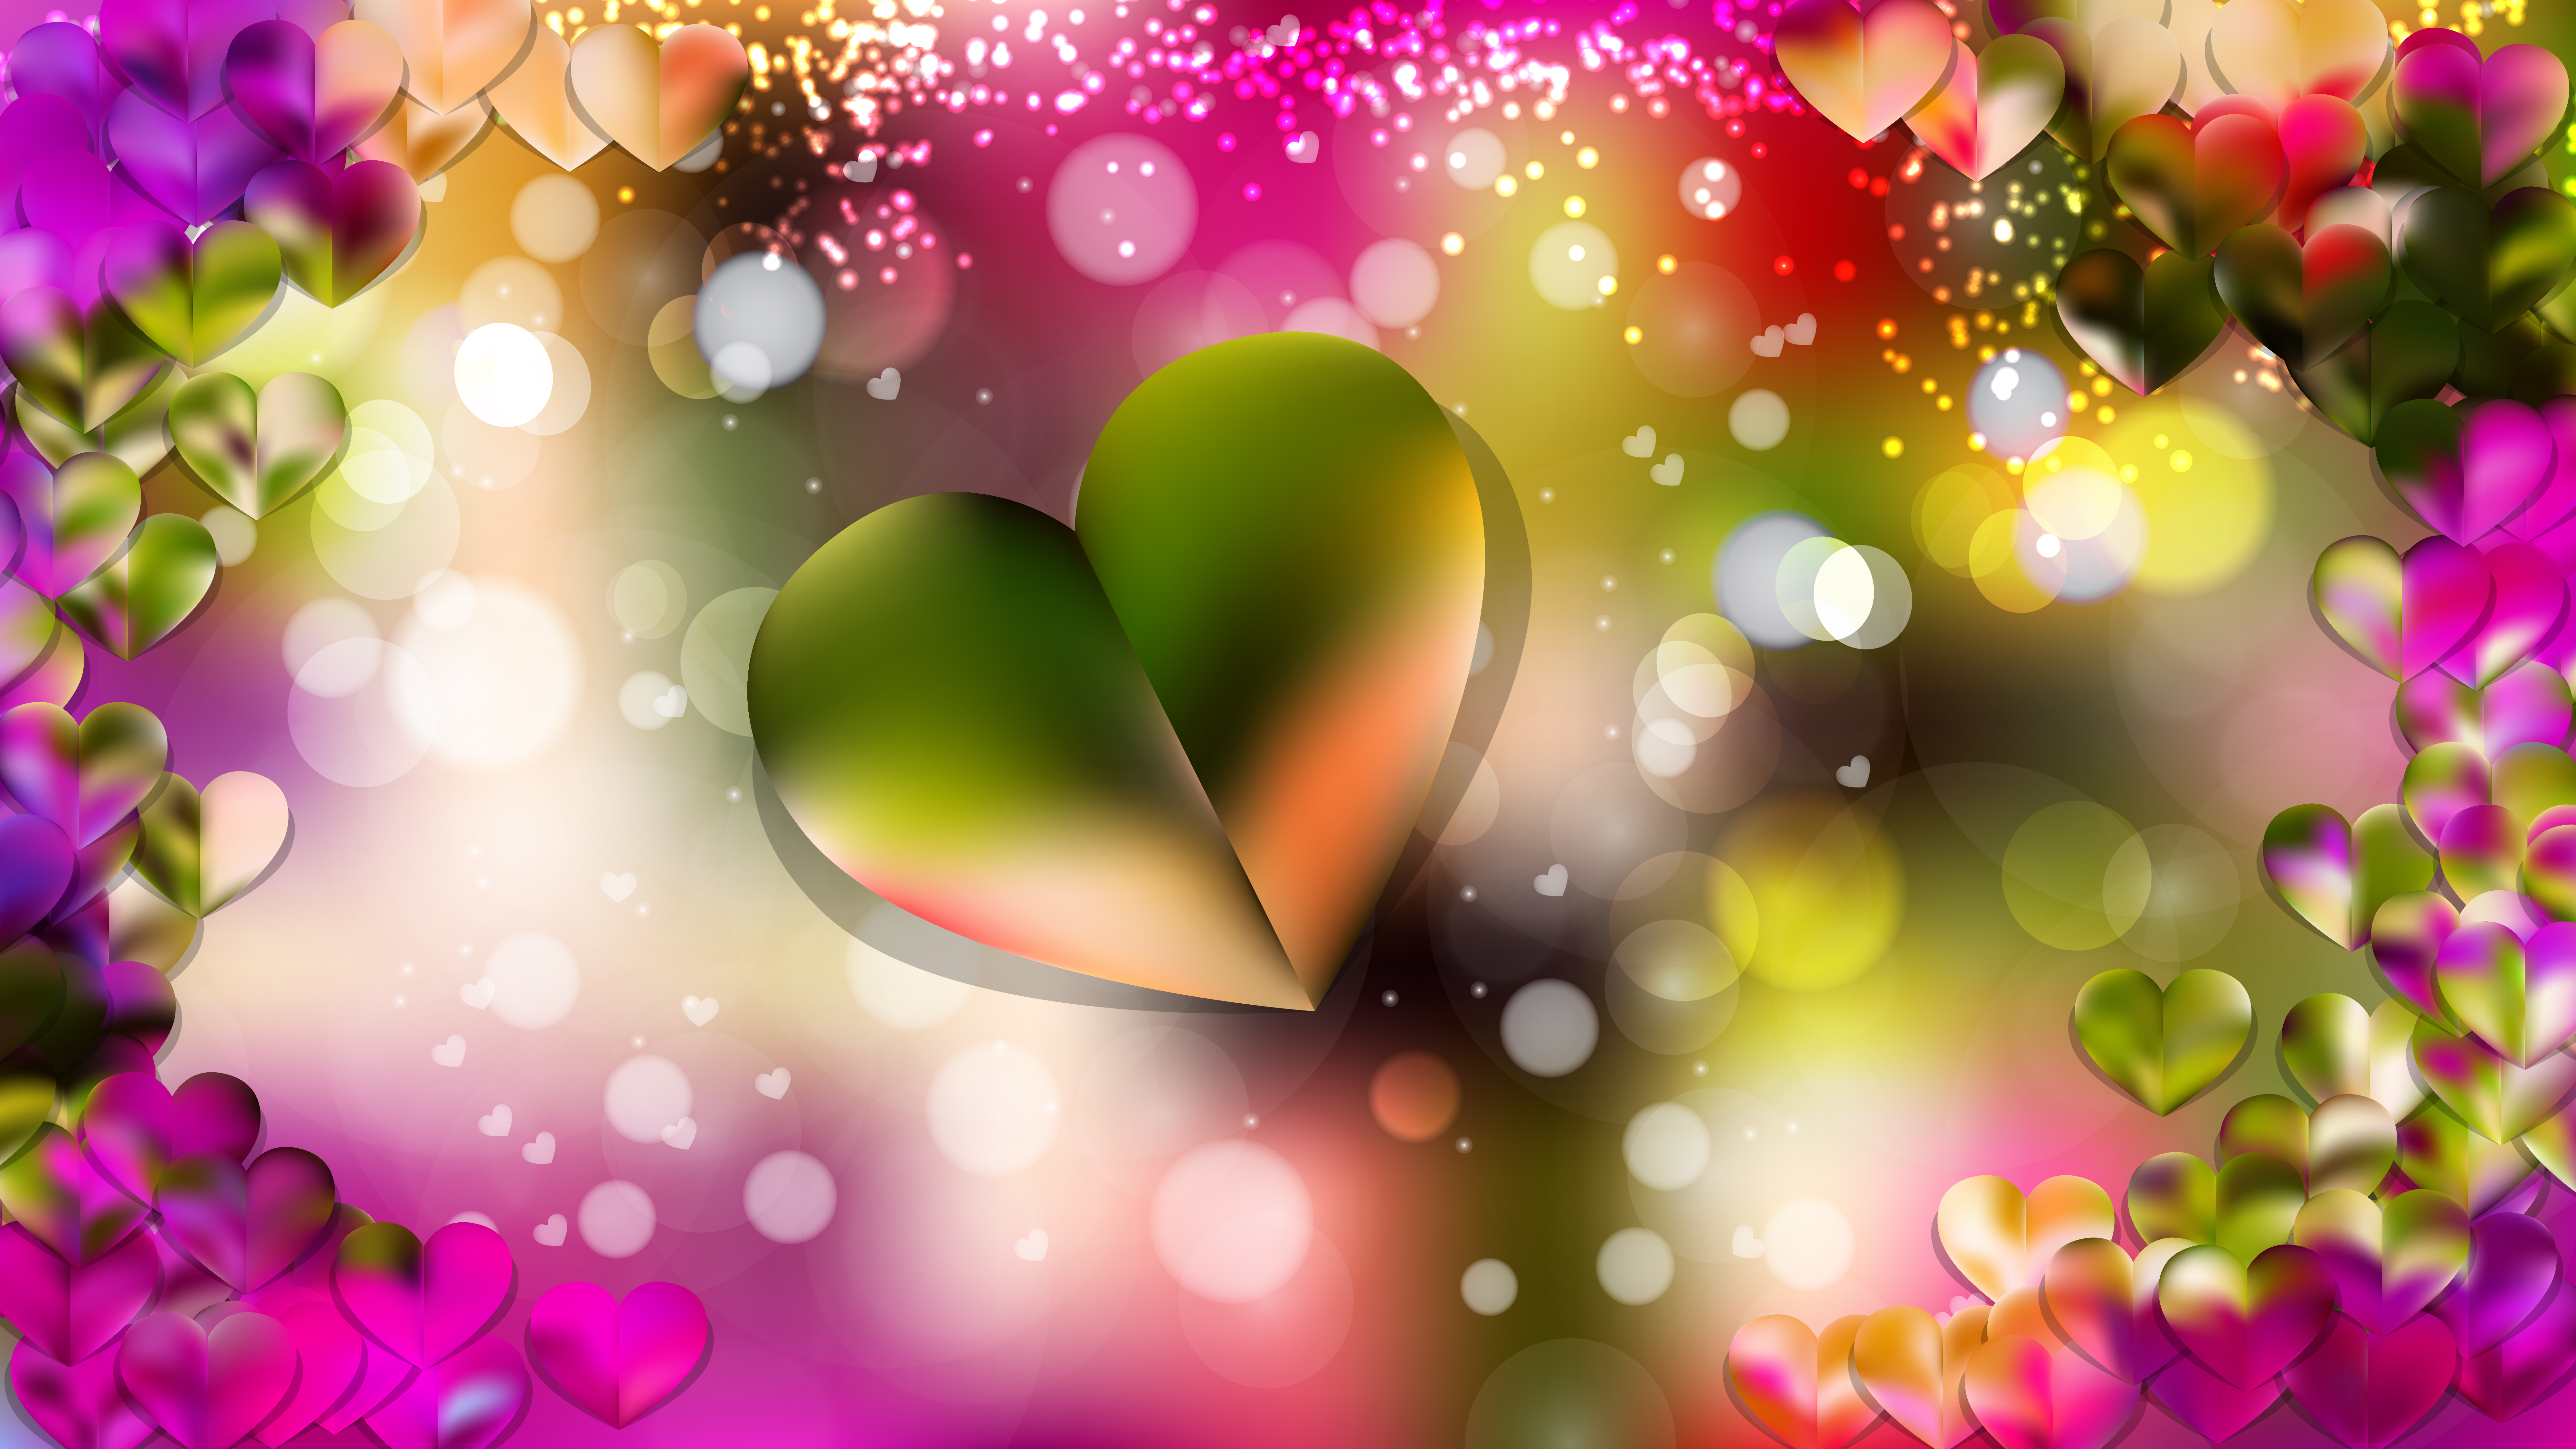 Pink And Green Heart Wallpaper Background - Pink And Green Hearts - HD Wallpaper 